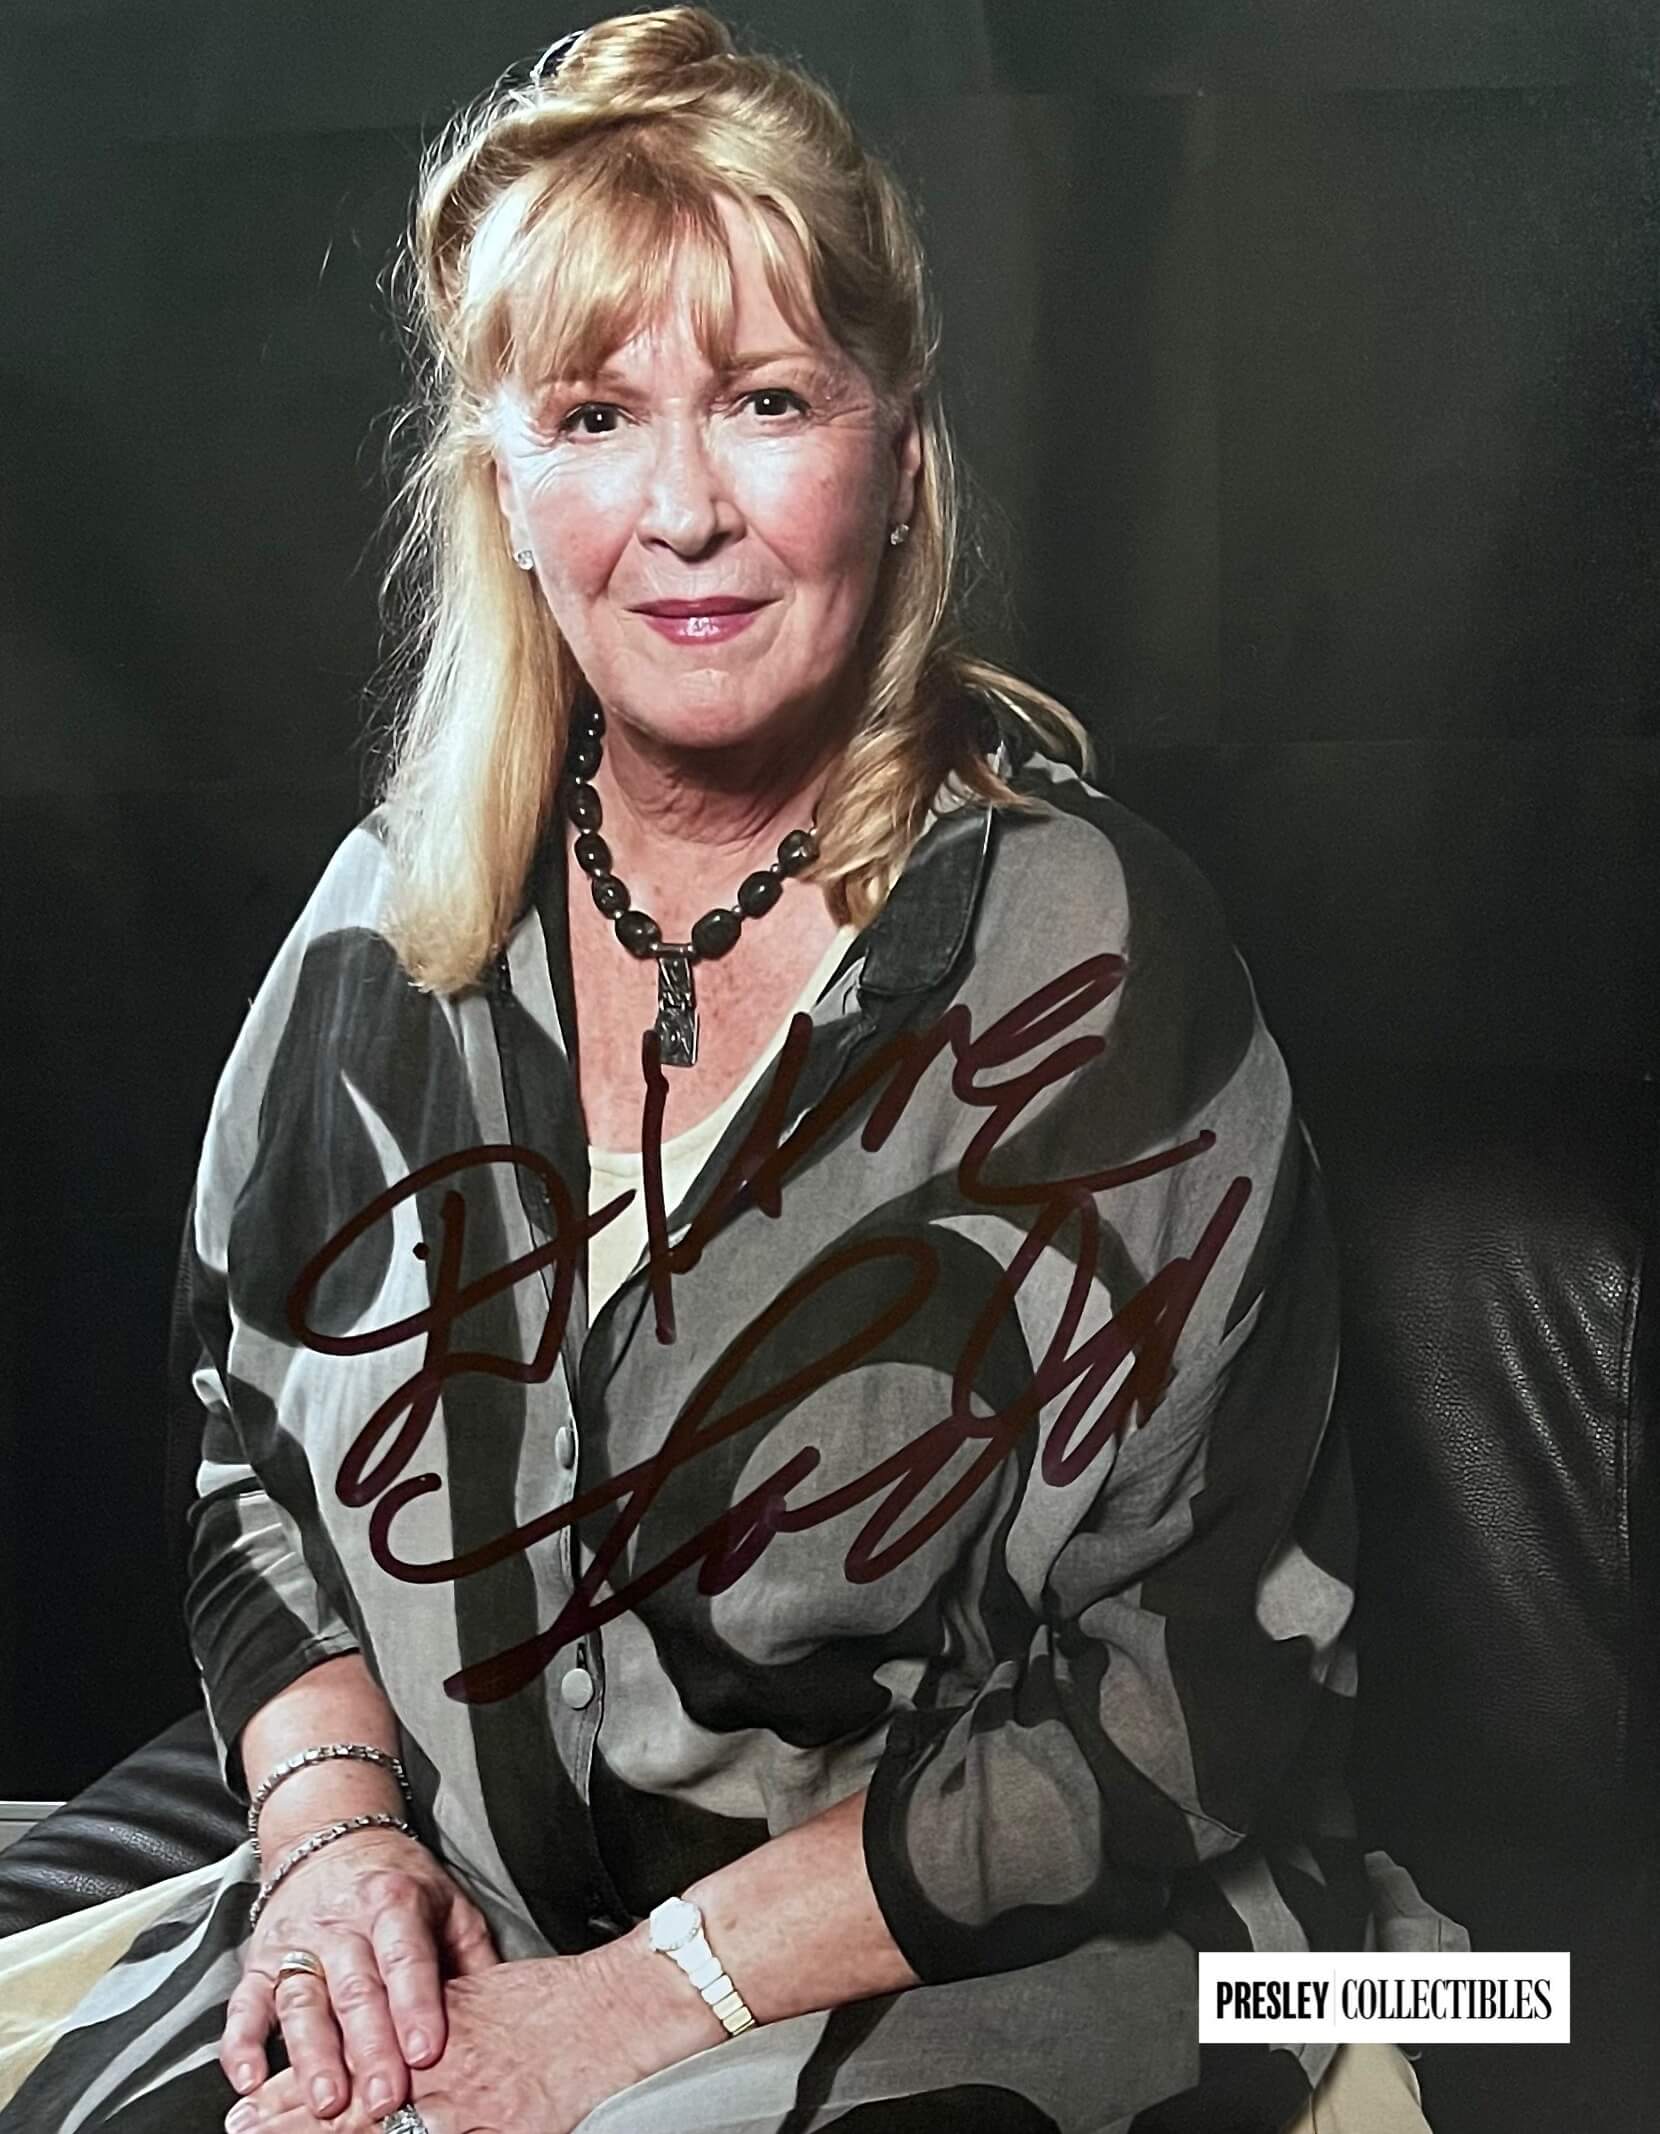 Diane Ladd Autograph For You To Own - Presley Collectibles